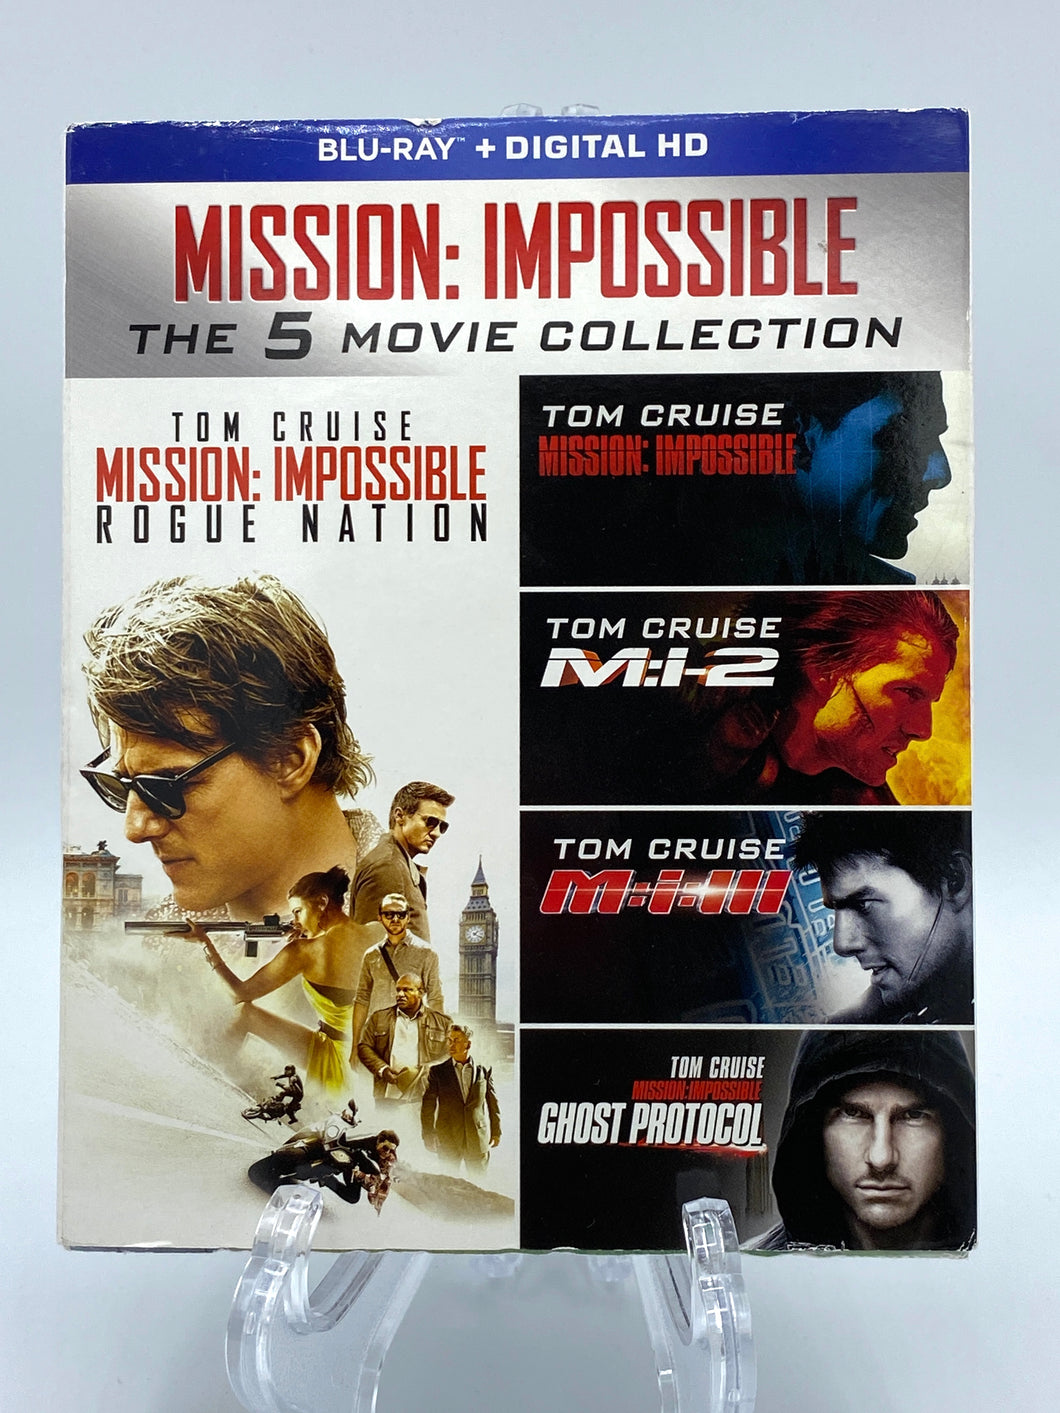 Mission: Impossible - The 5 Movie Collection (Blu-Ray set)